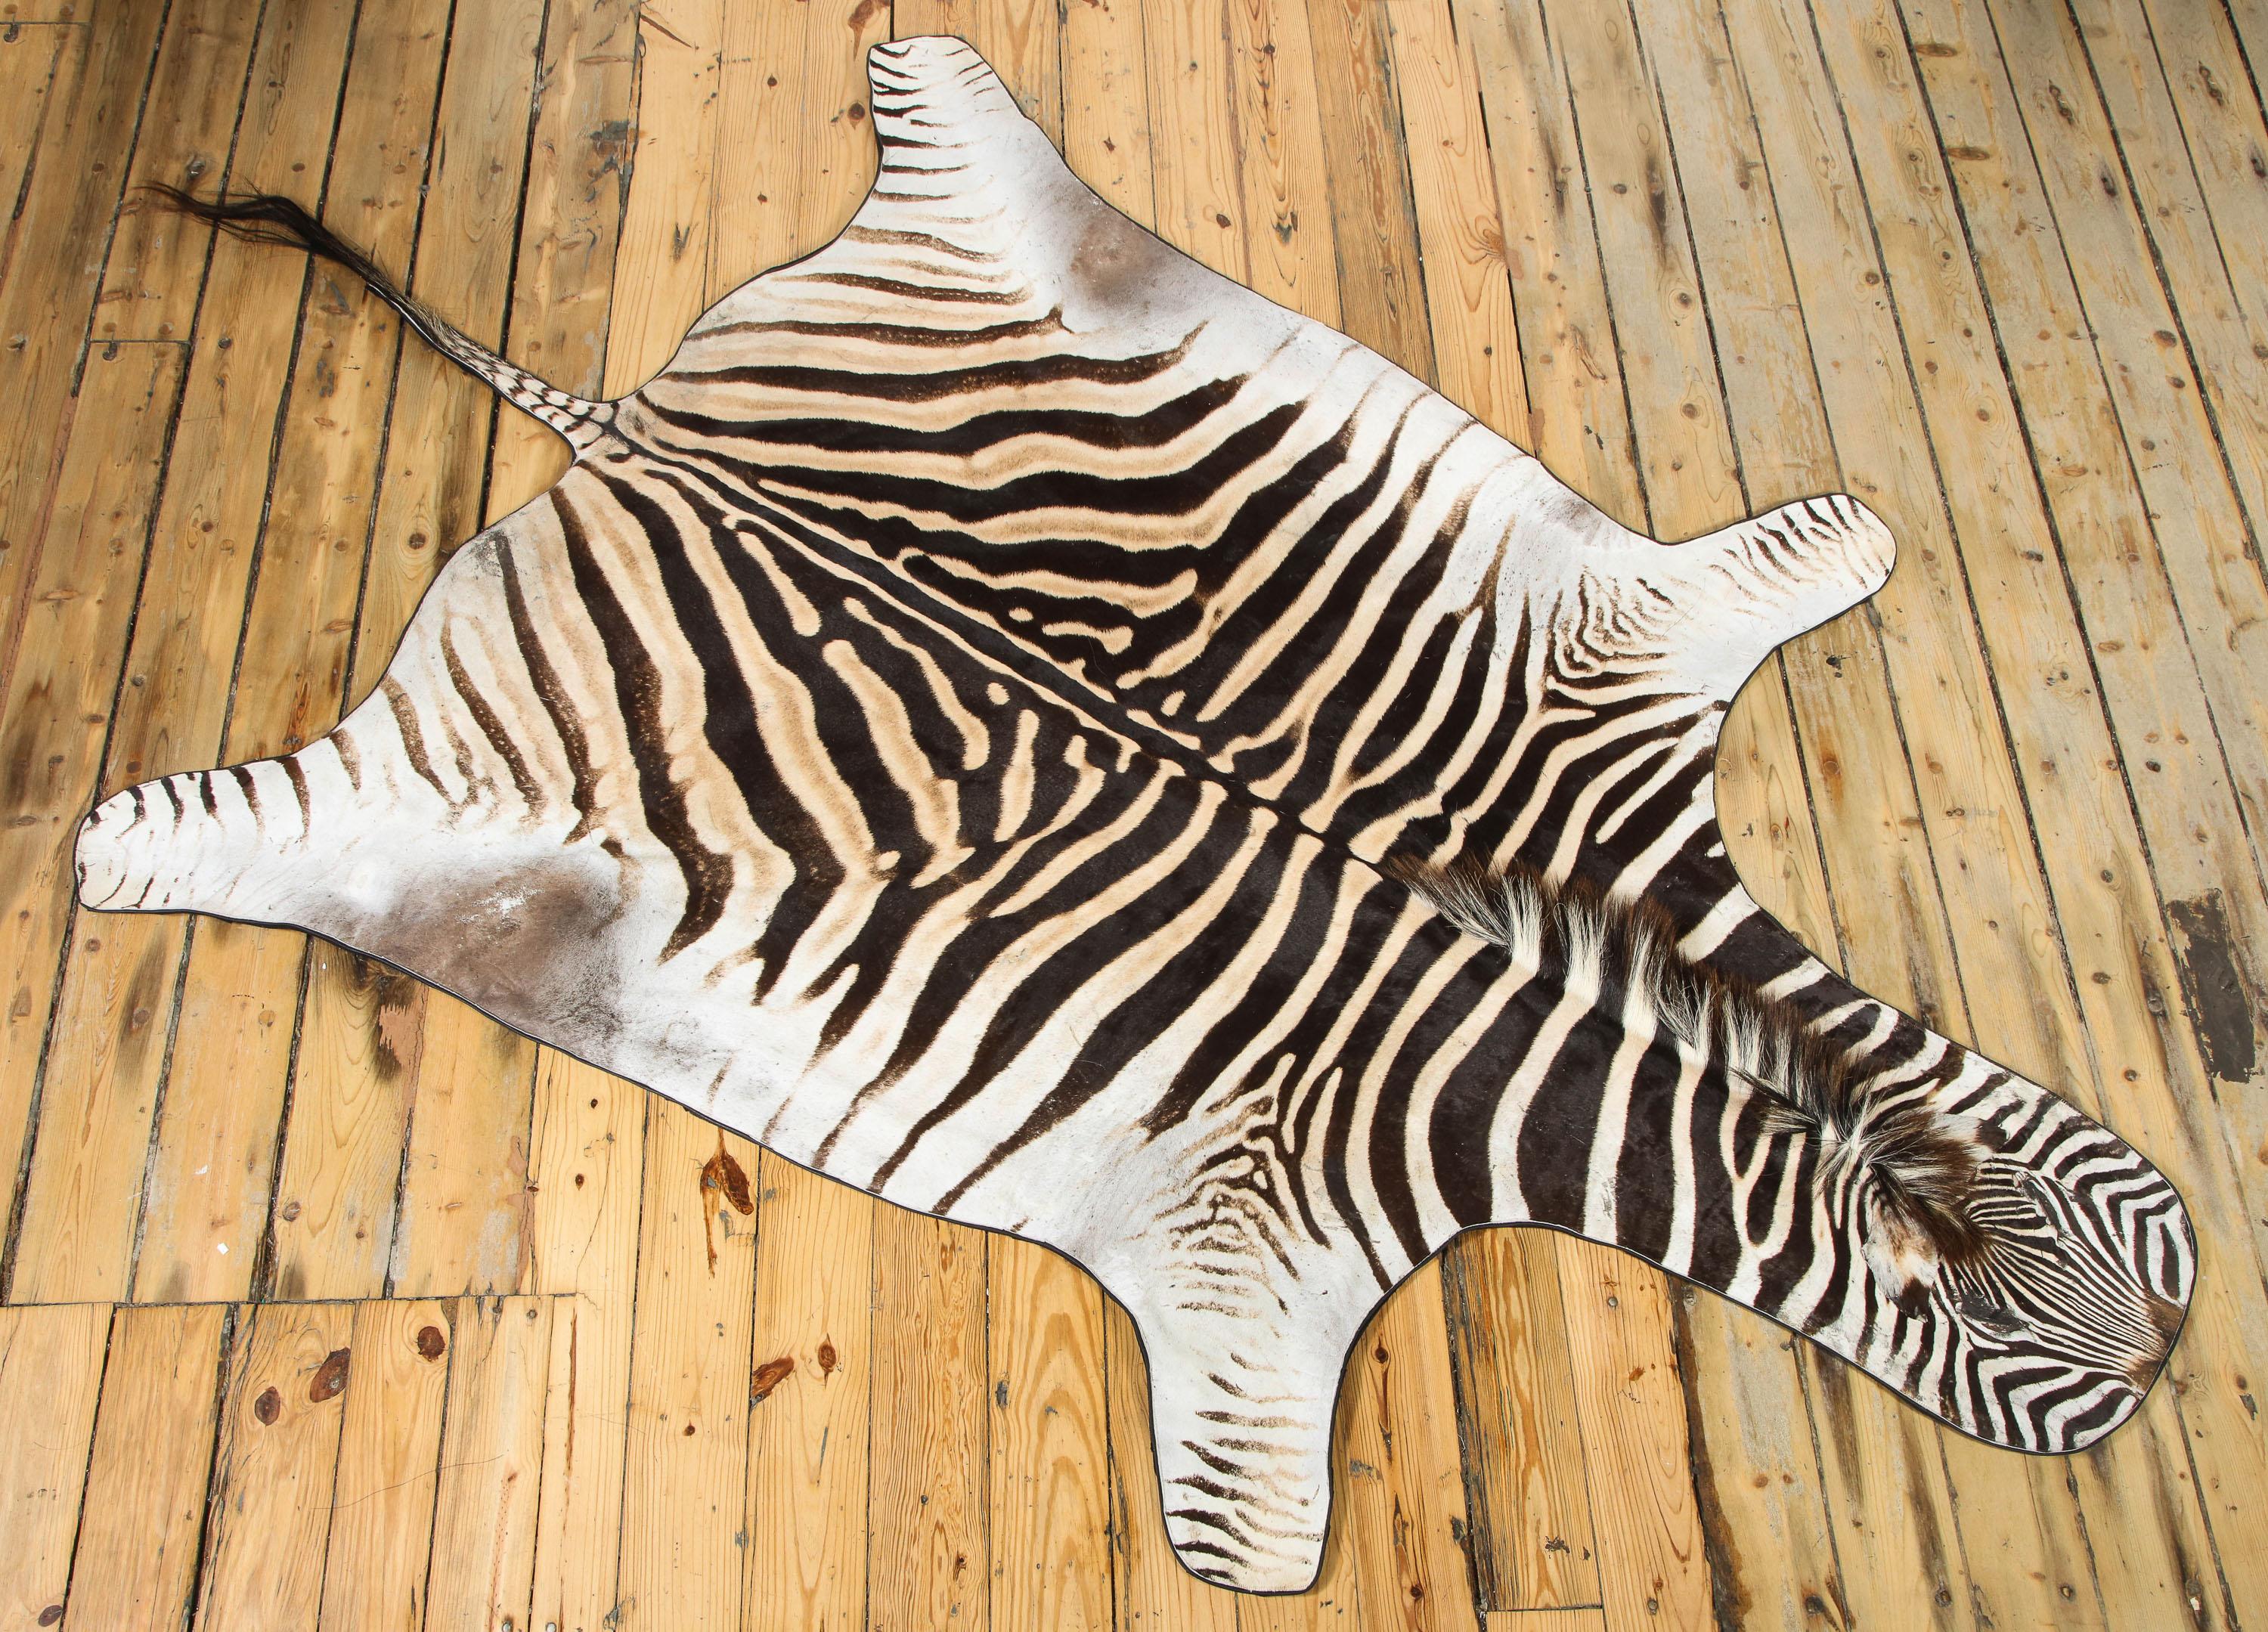 Decorative new zebra rug from South Africa. The hide is backed with a wool felt fabric and trimmed with leather all around.
This zebra hide is sold but we have received a new zebra rug. The new zebra rug measures about: length 89 inches and width 53